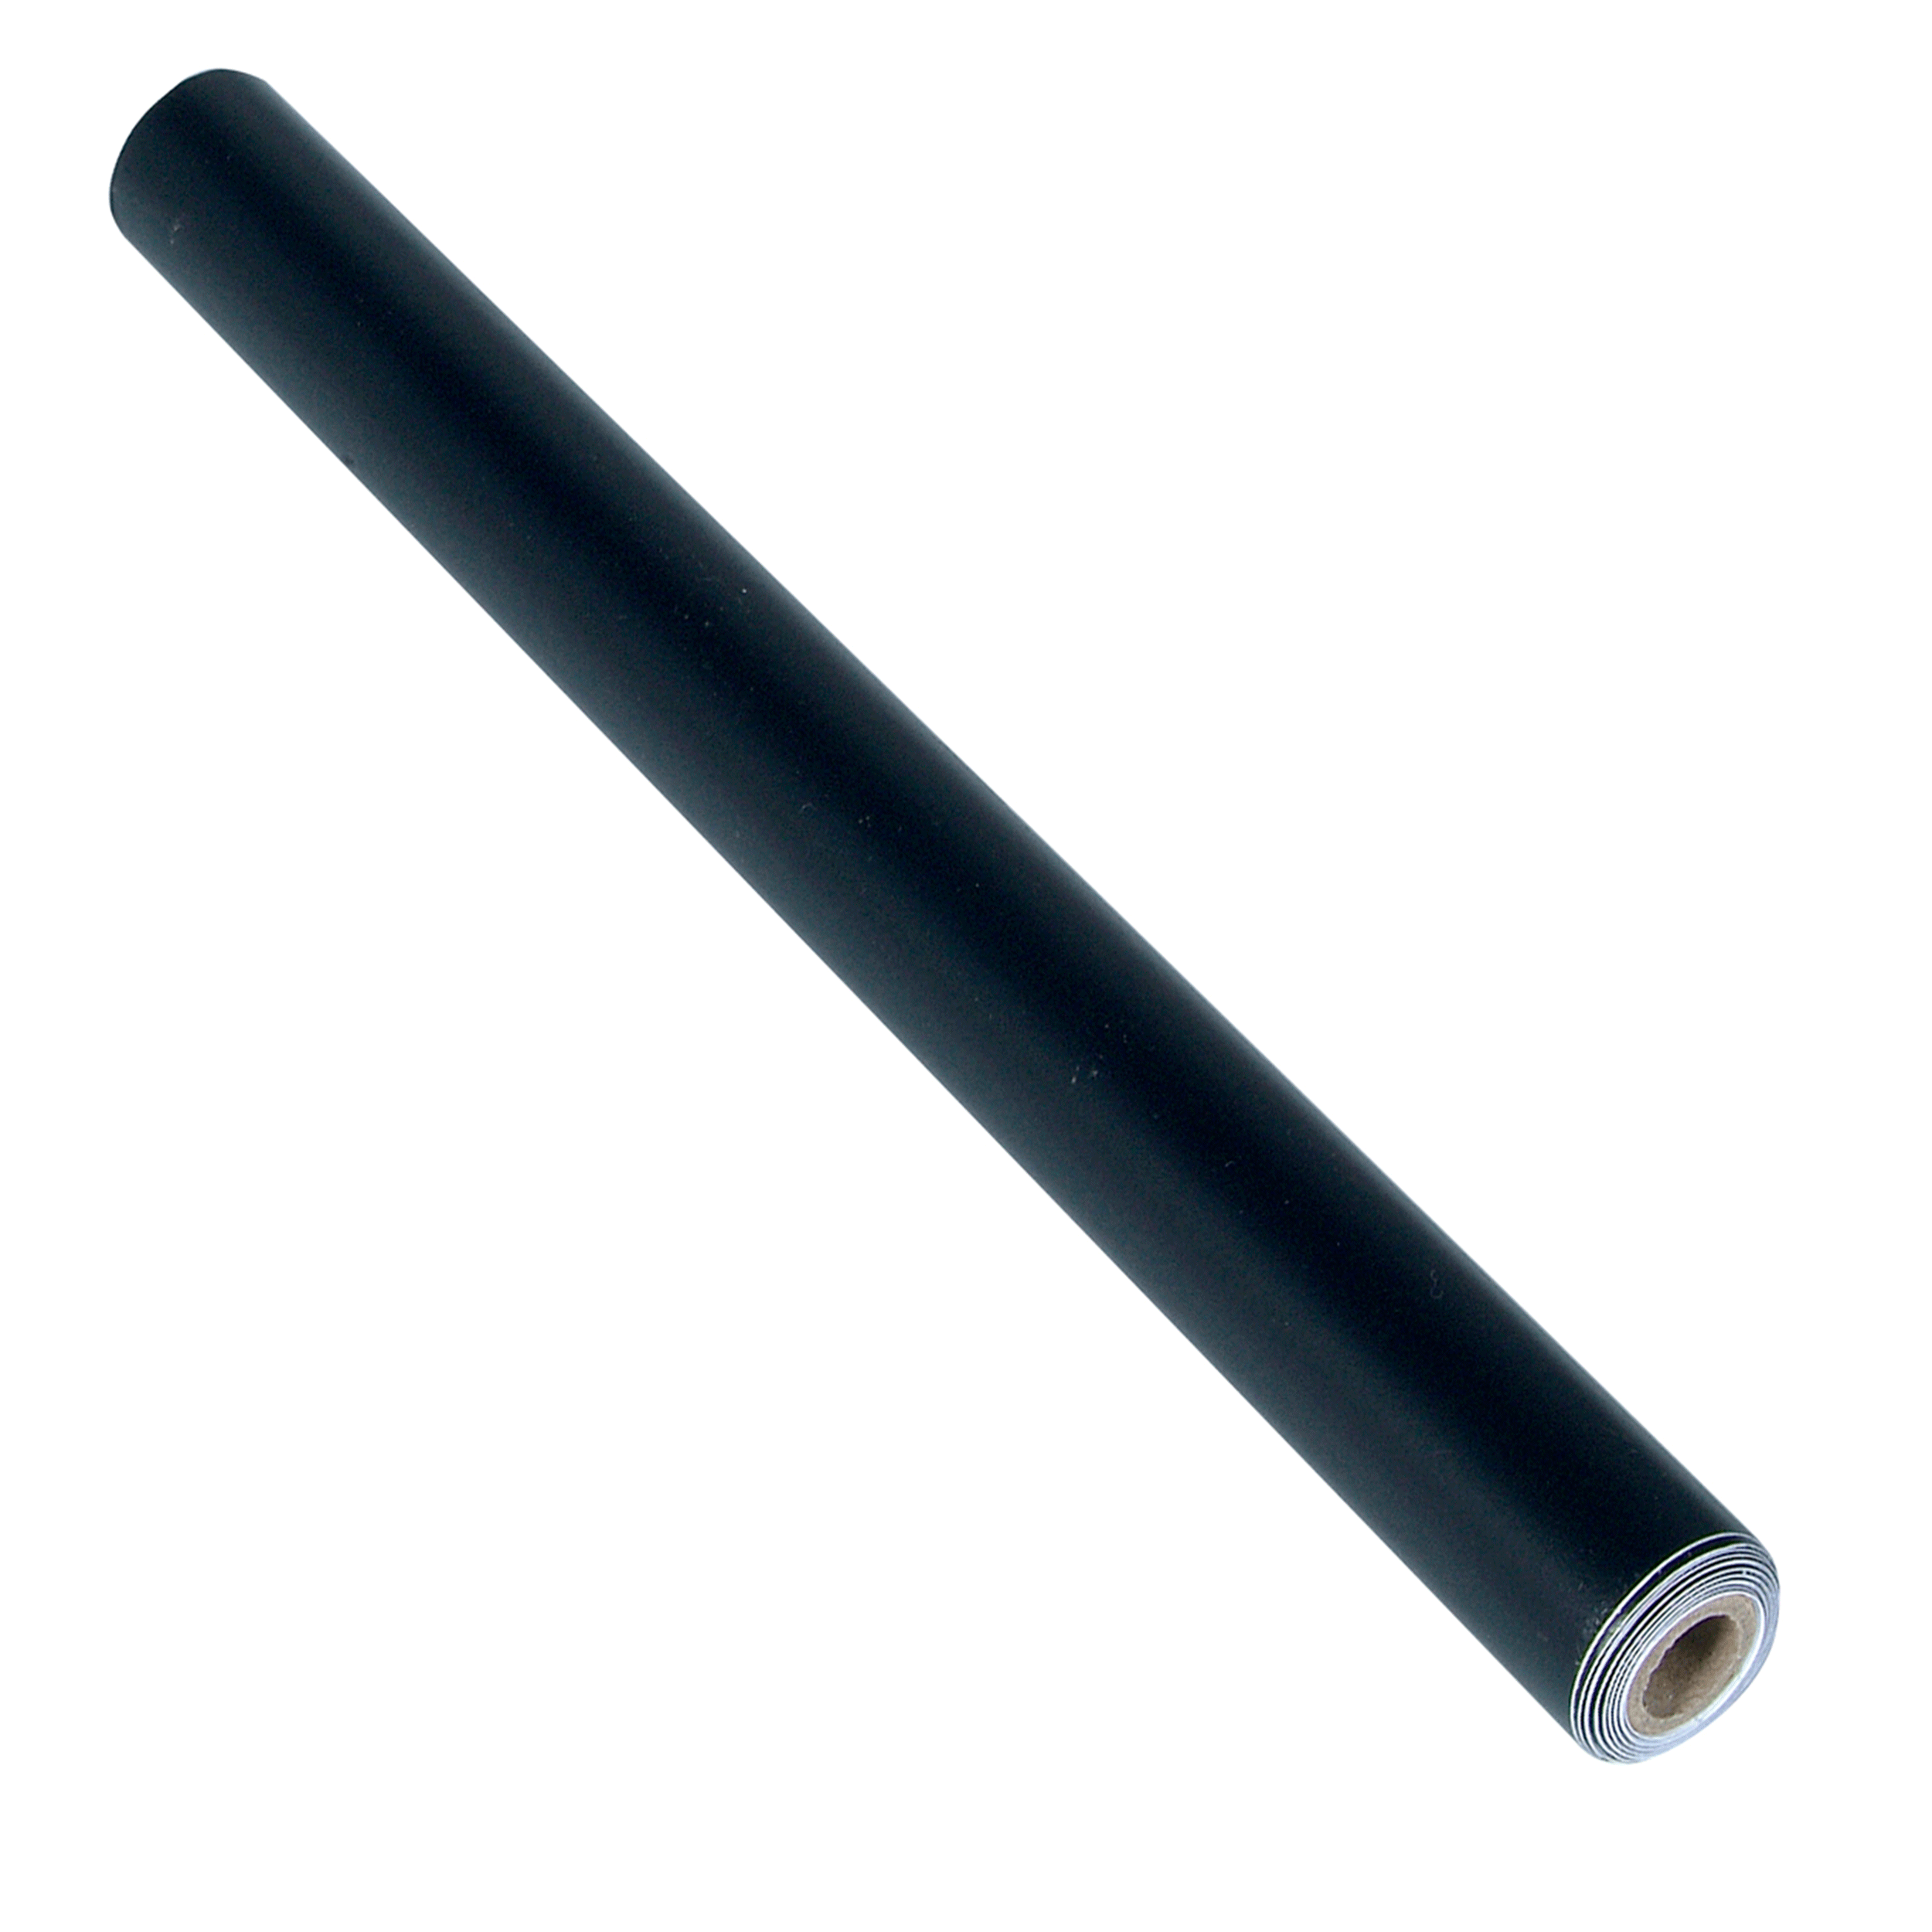 12" X 60" Shadow Board Black Vinyl Self-adhesive Tape Roll To Silhouette And Manage Tools And Equipment